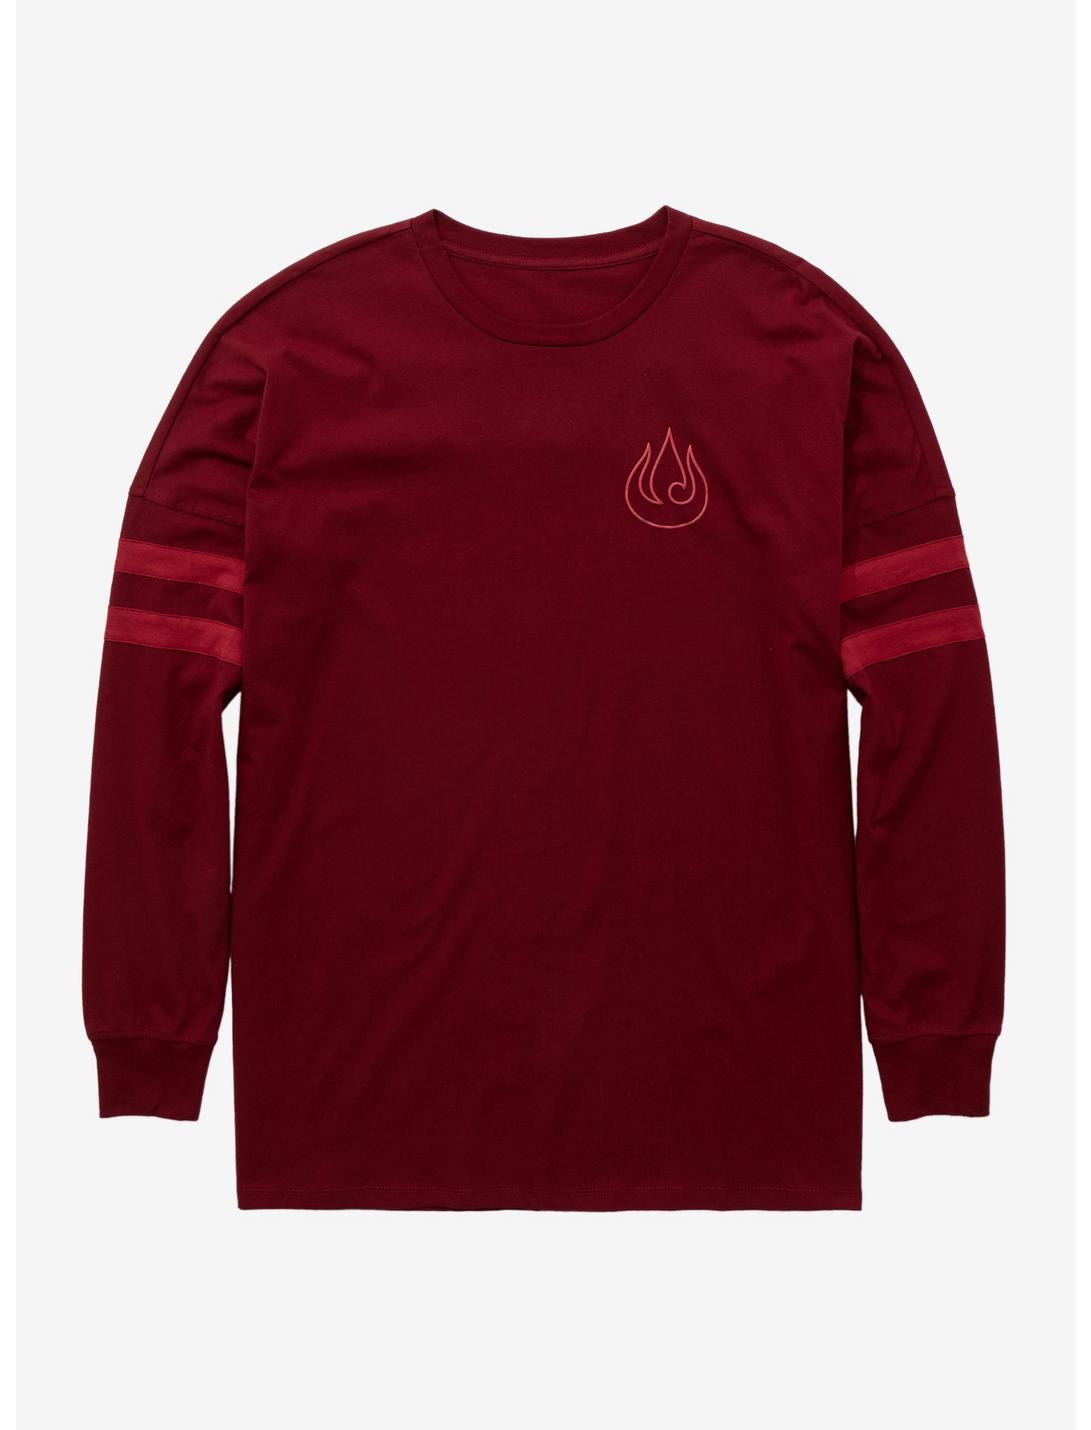 Avatar: The Last Airbender Fire Nation Athletic Jersey, MULTI, hi-res